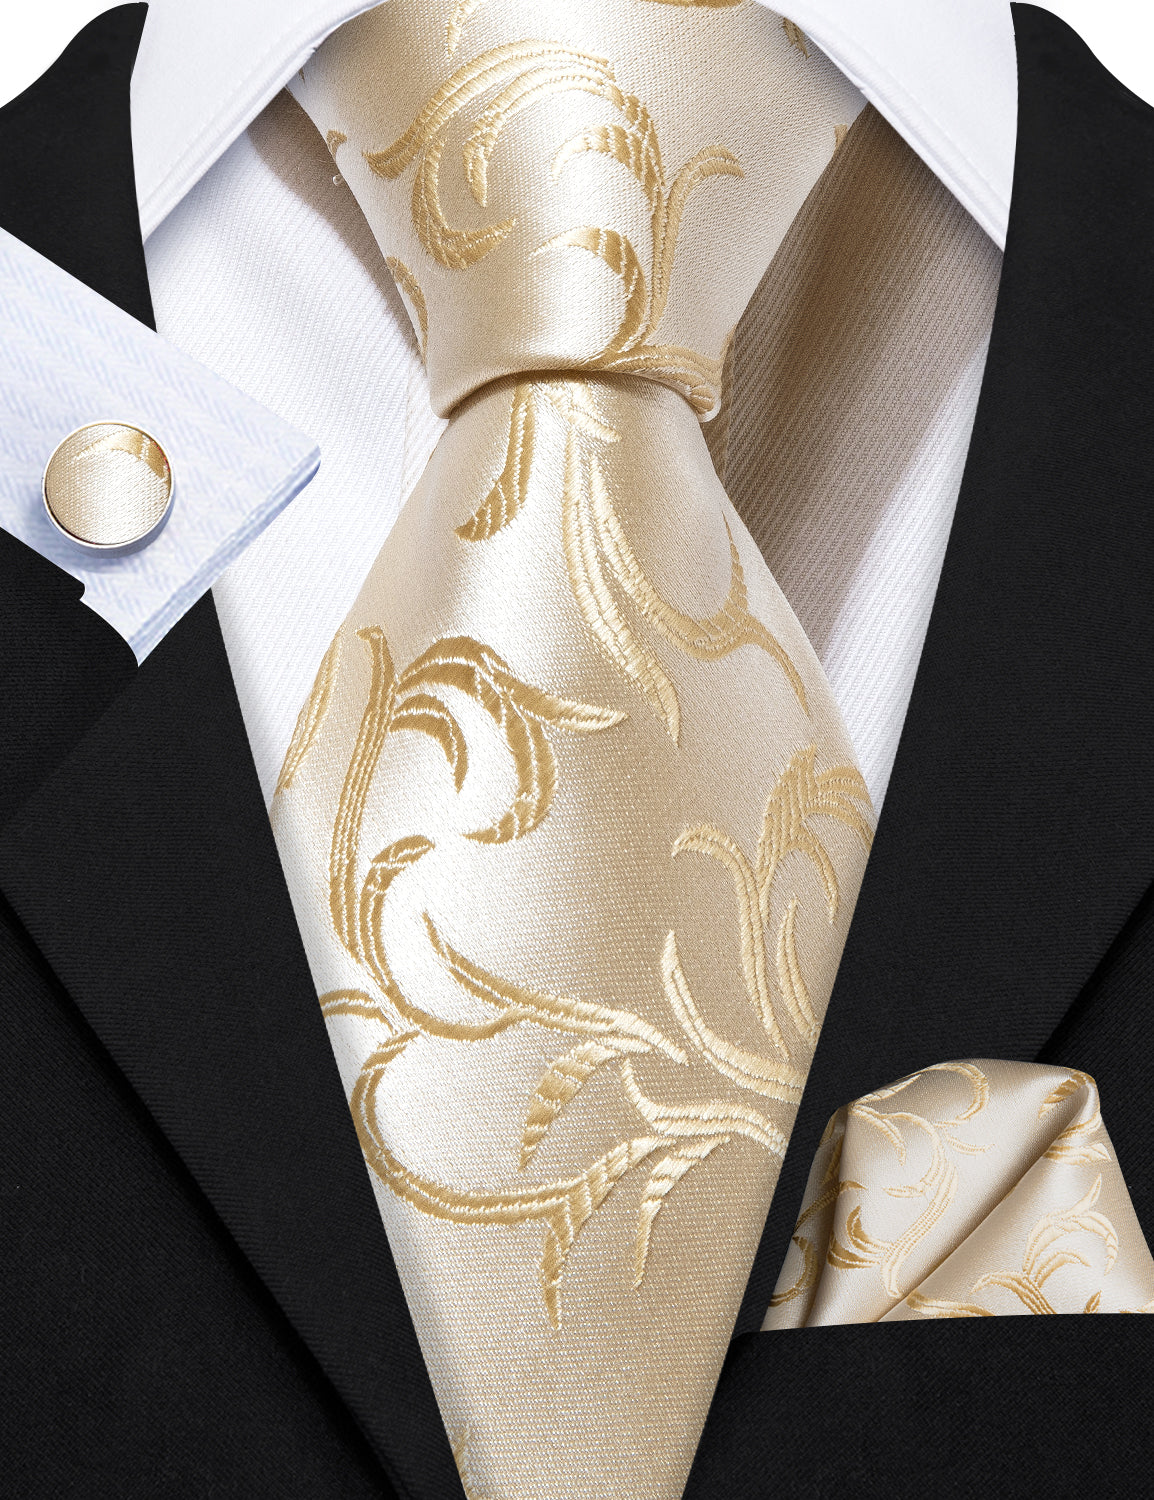 Barry.wang Floral Tie Champagne Silver Tie Pocket Square Cufflinks Set